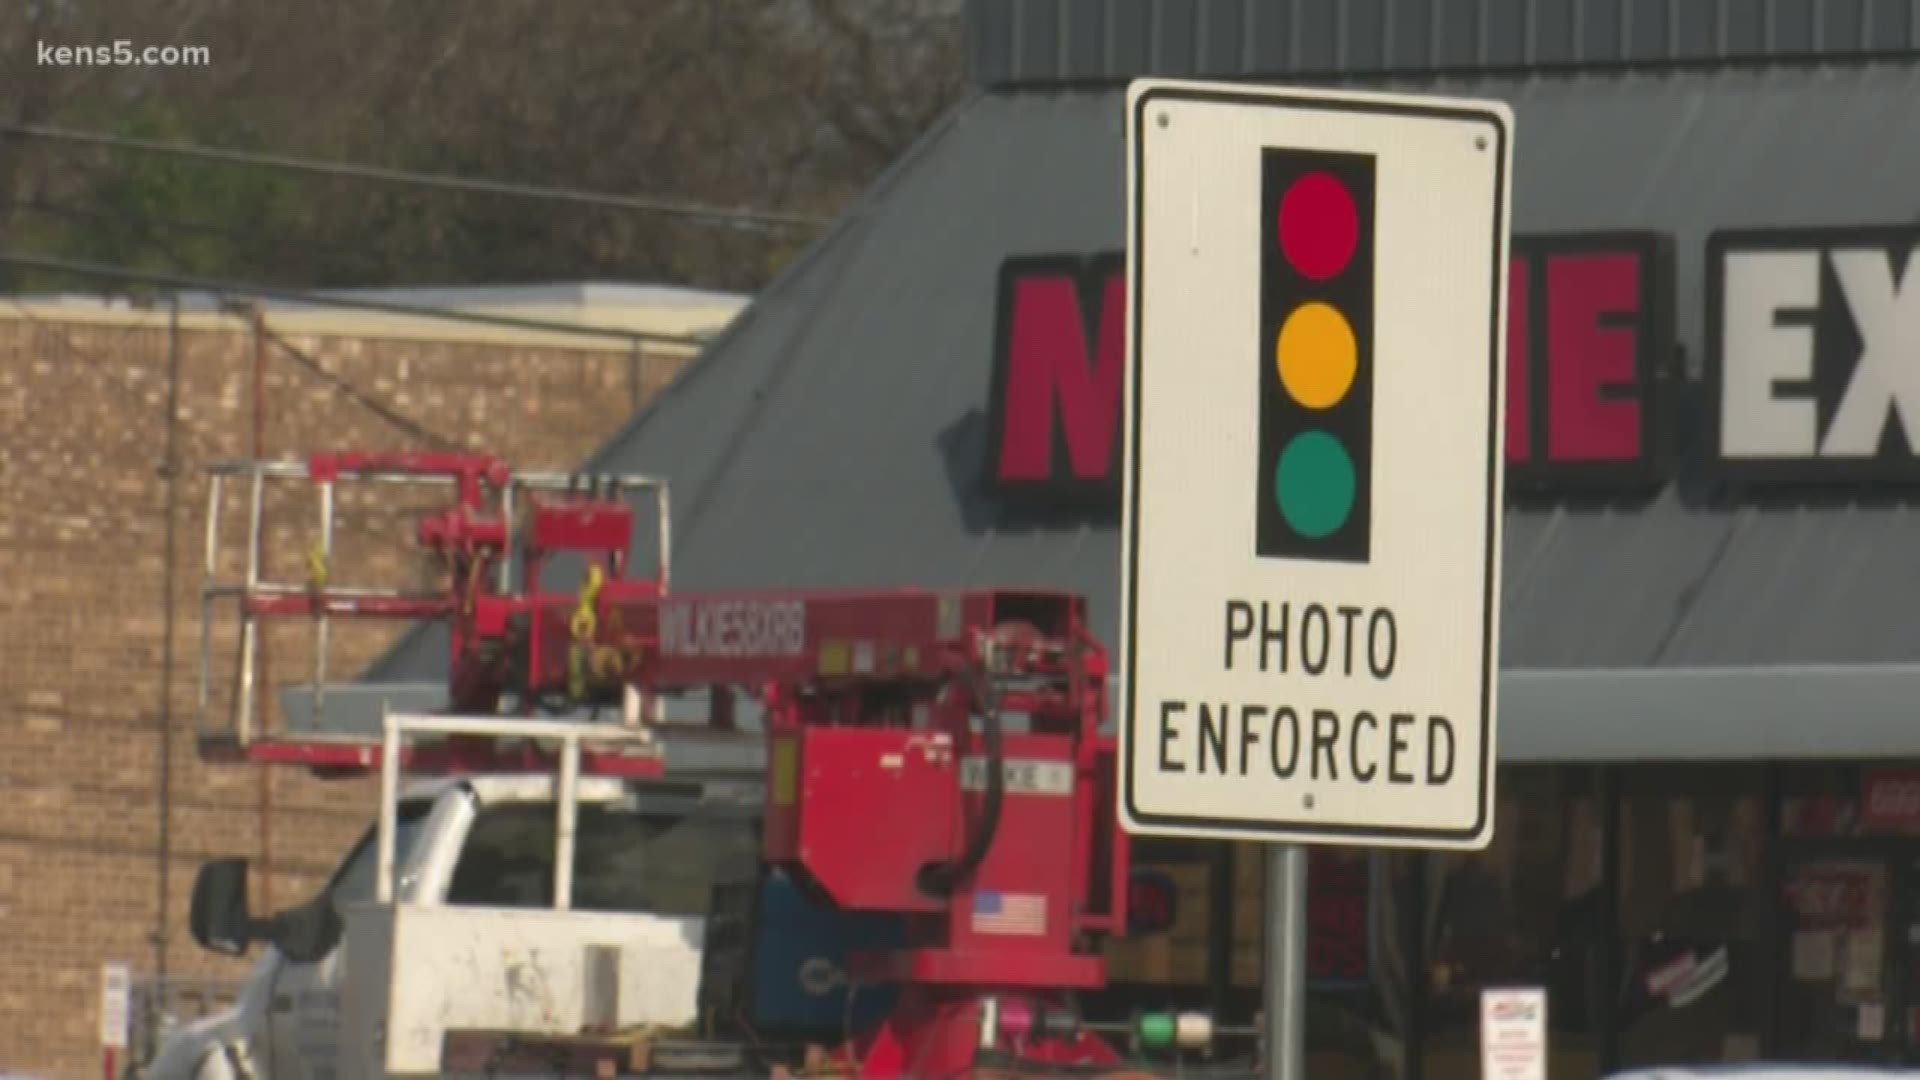 Red light cameras are working so well in Leon Valley, they're adding more. Eyewitness News reporter Sue Calberg is live on Bandera Road, where they've issued more than 50,000 citations since March.